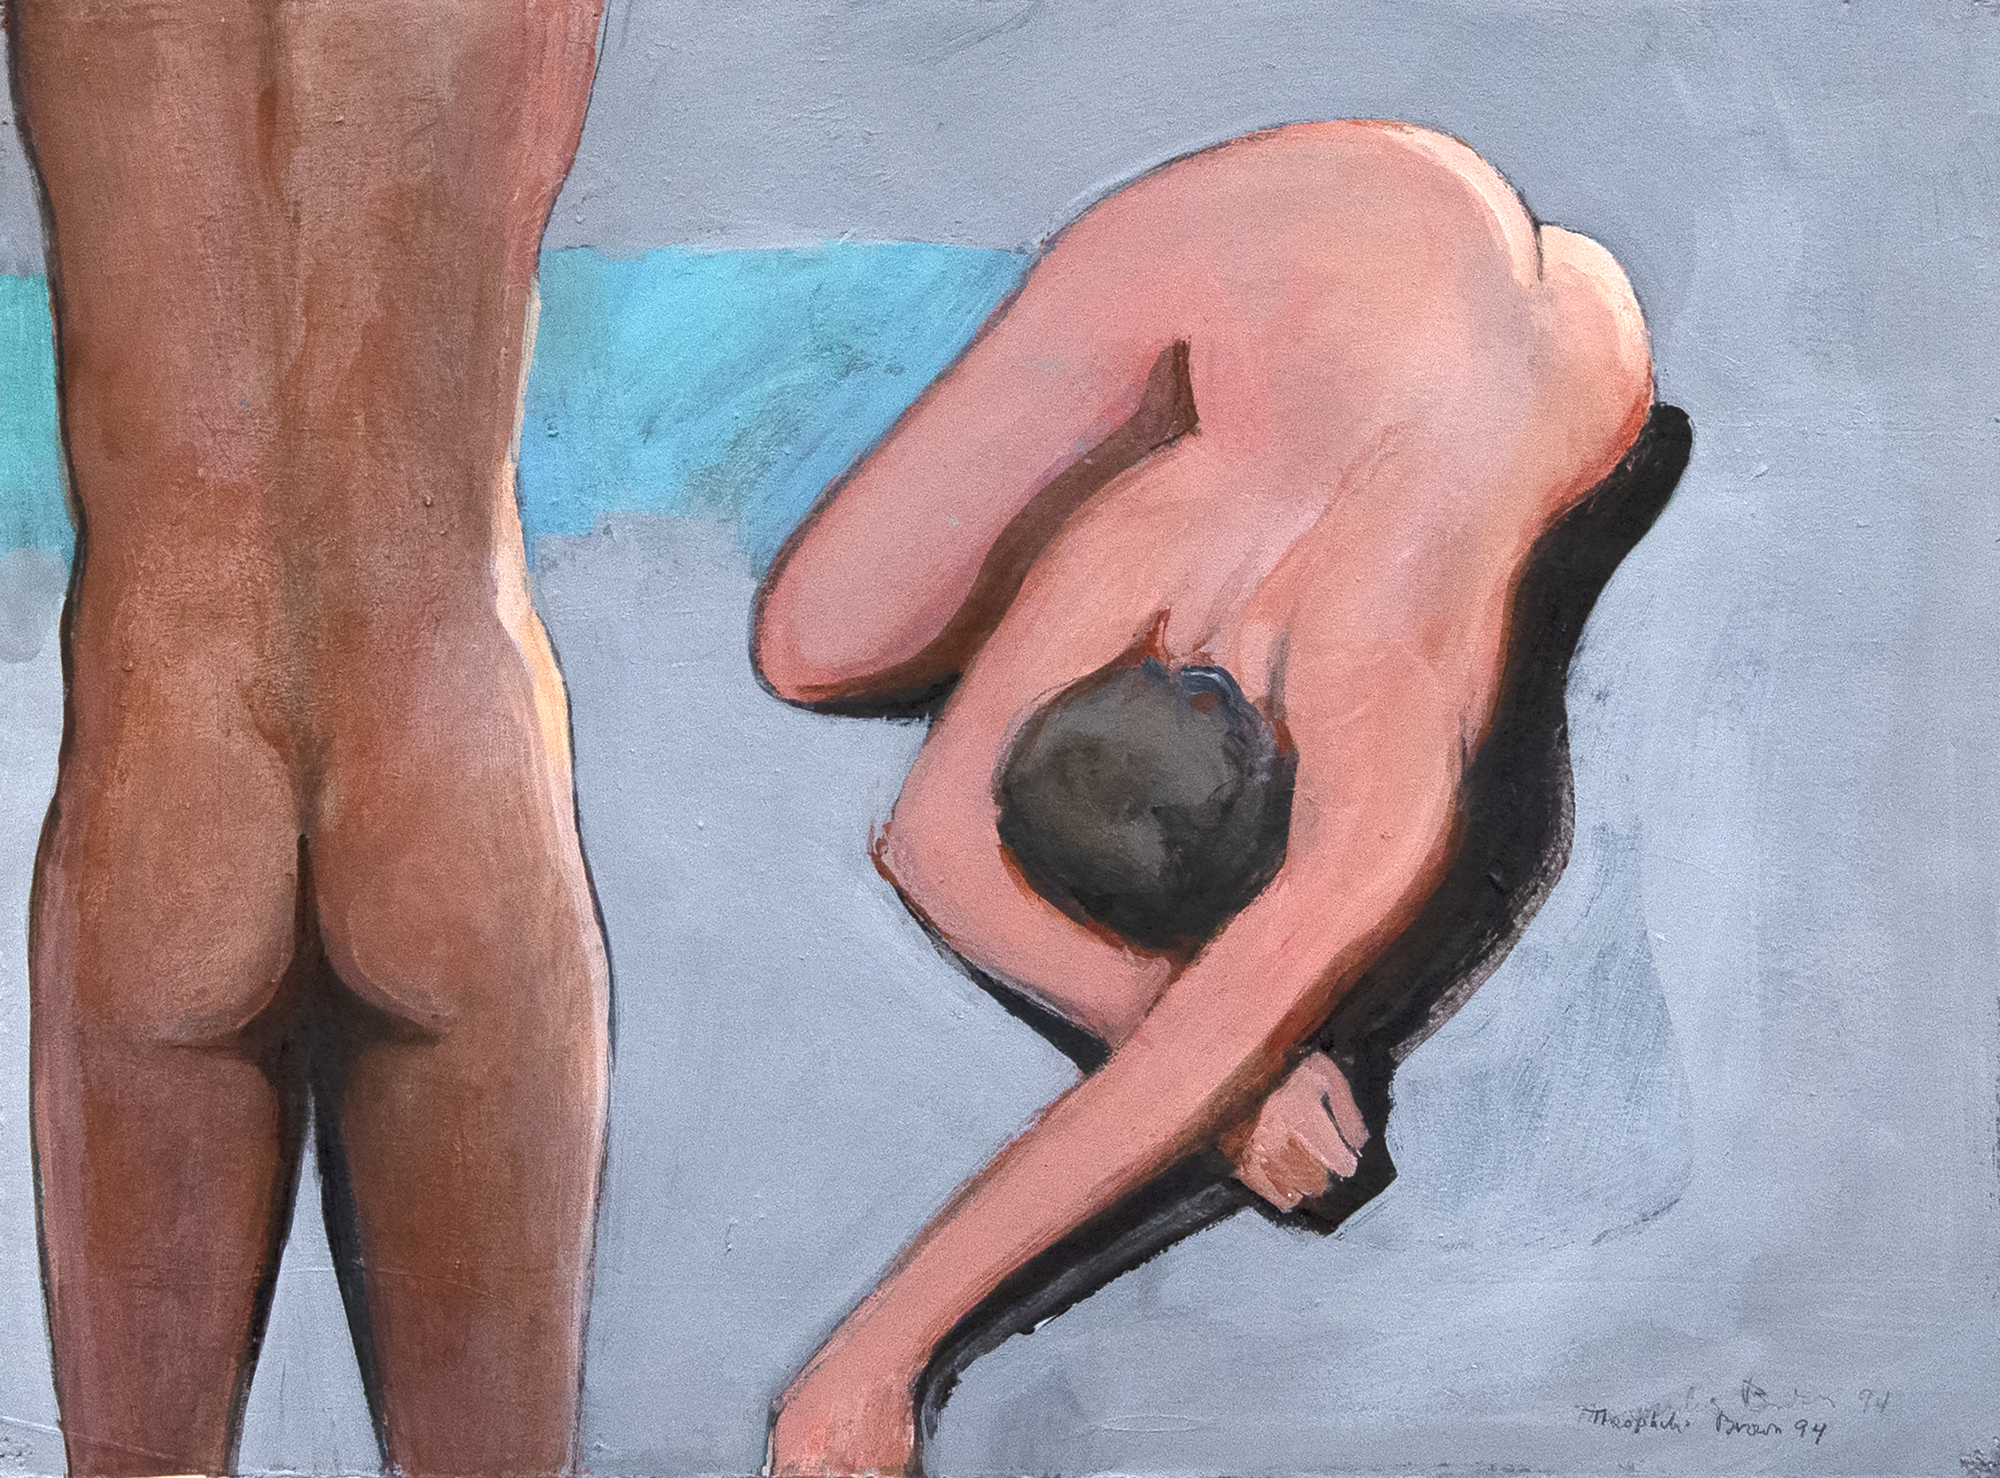 WILLIAM THEOPHILUS BROWN - Untitled (Two Nudes) (Two Figures) - acrylic and charcoal on paper - 11 x 15 in.